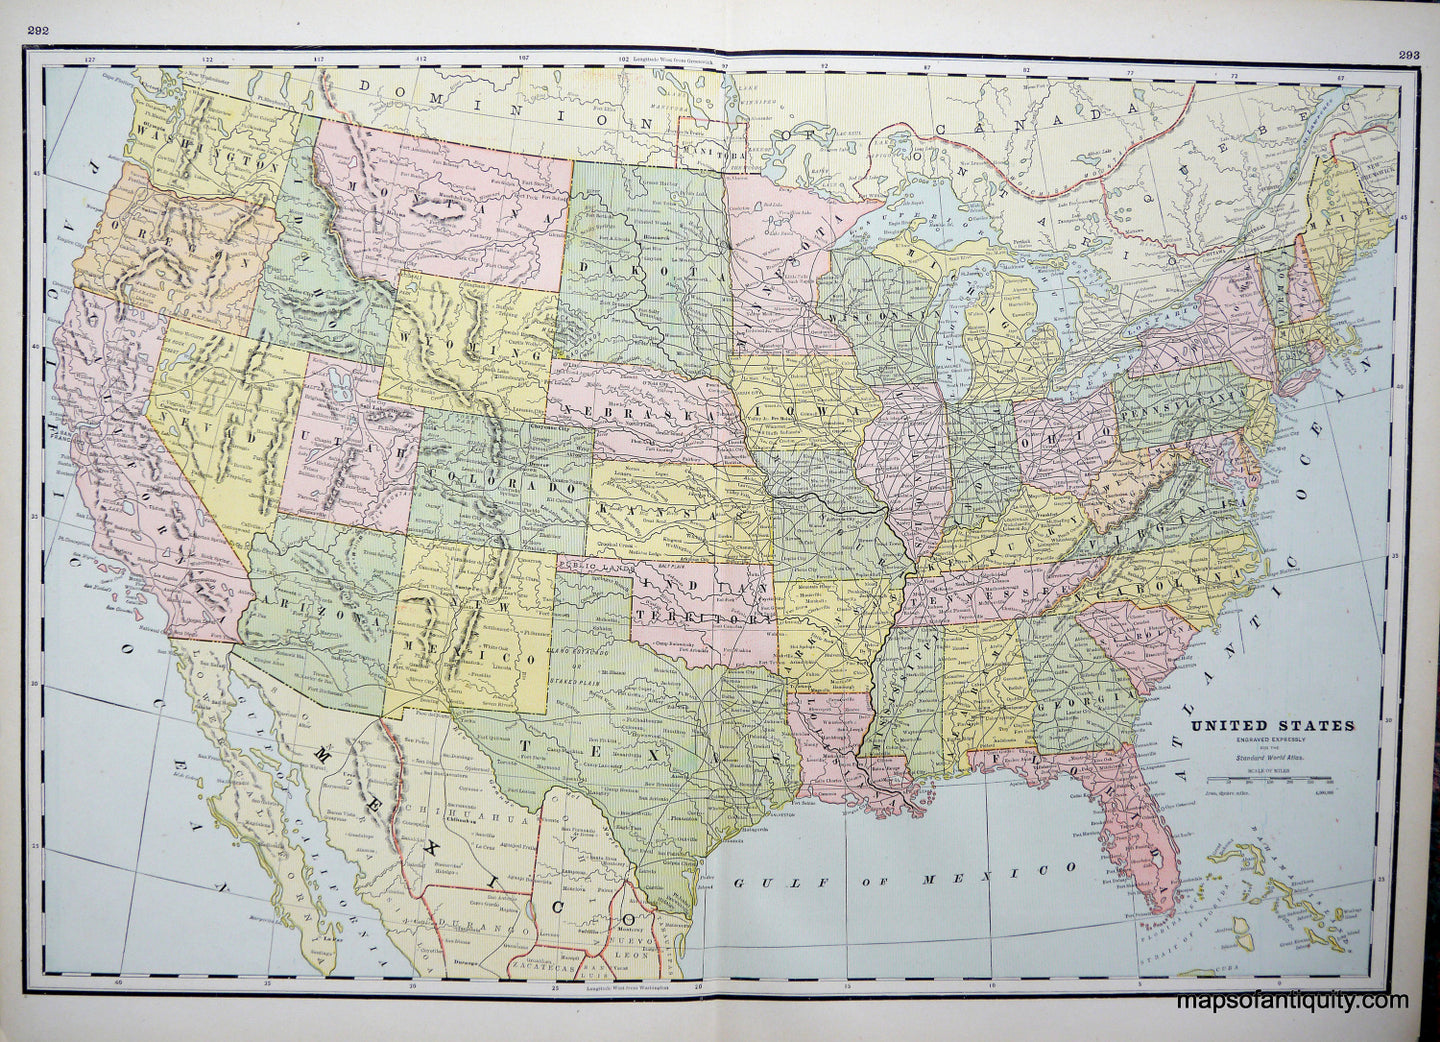 Printed-Color-Antique-Map-United-States-United-States--1888-Cram-Maps-Of-Antiquity